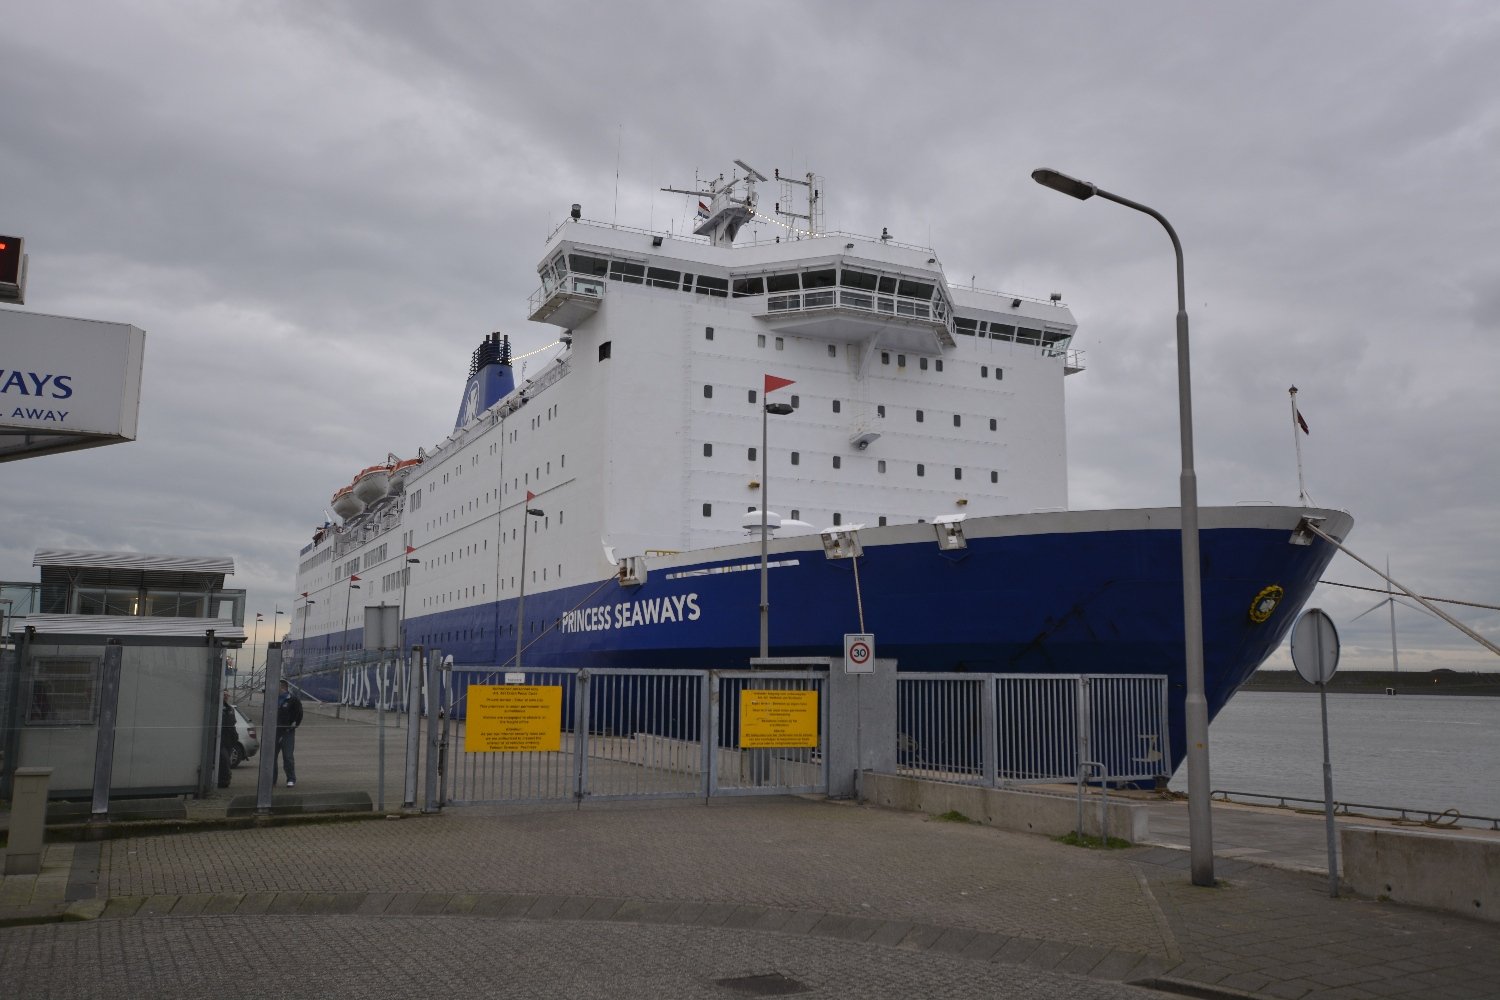 dfds seaways new year cruise